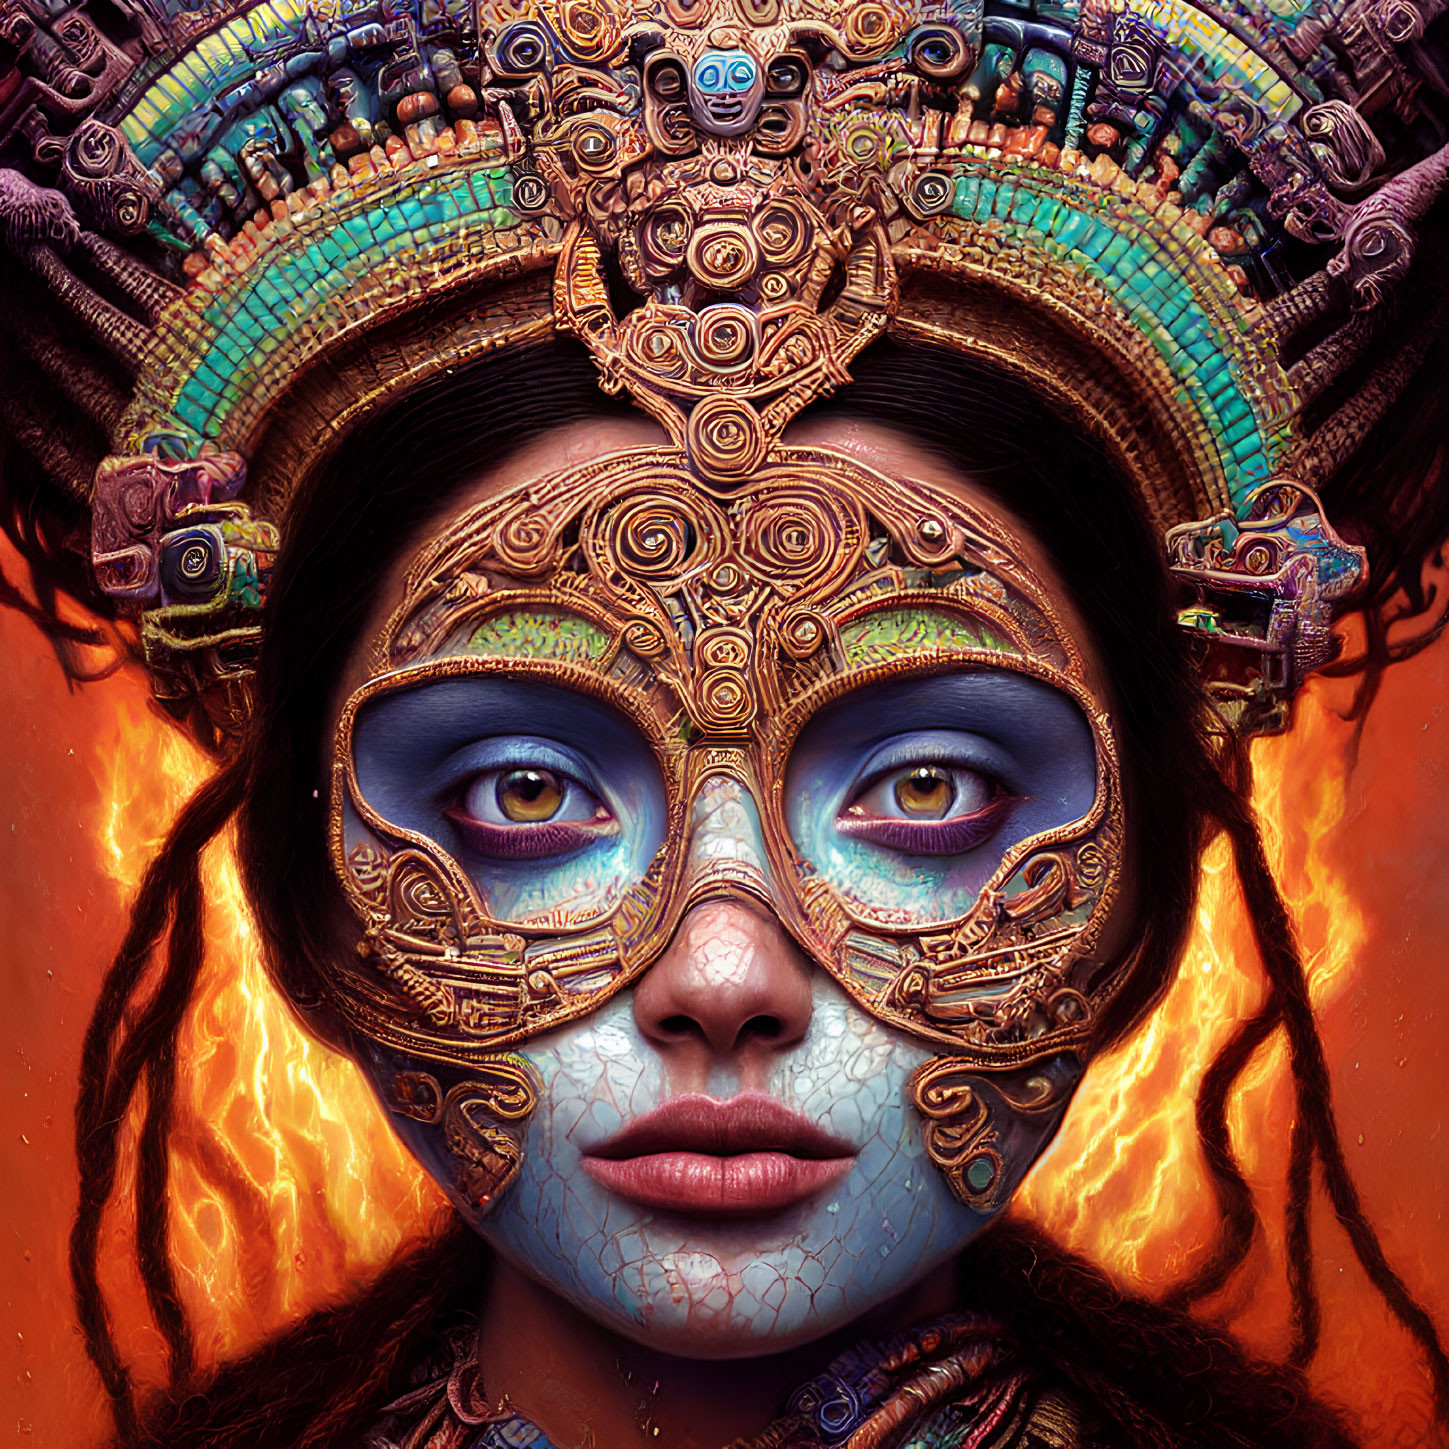 Detailed illustration of person with ornate headdress and mask-like facial decoration against vibrant, fiery background